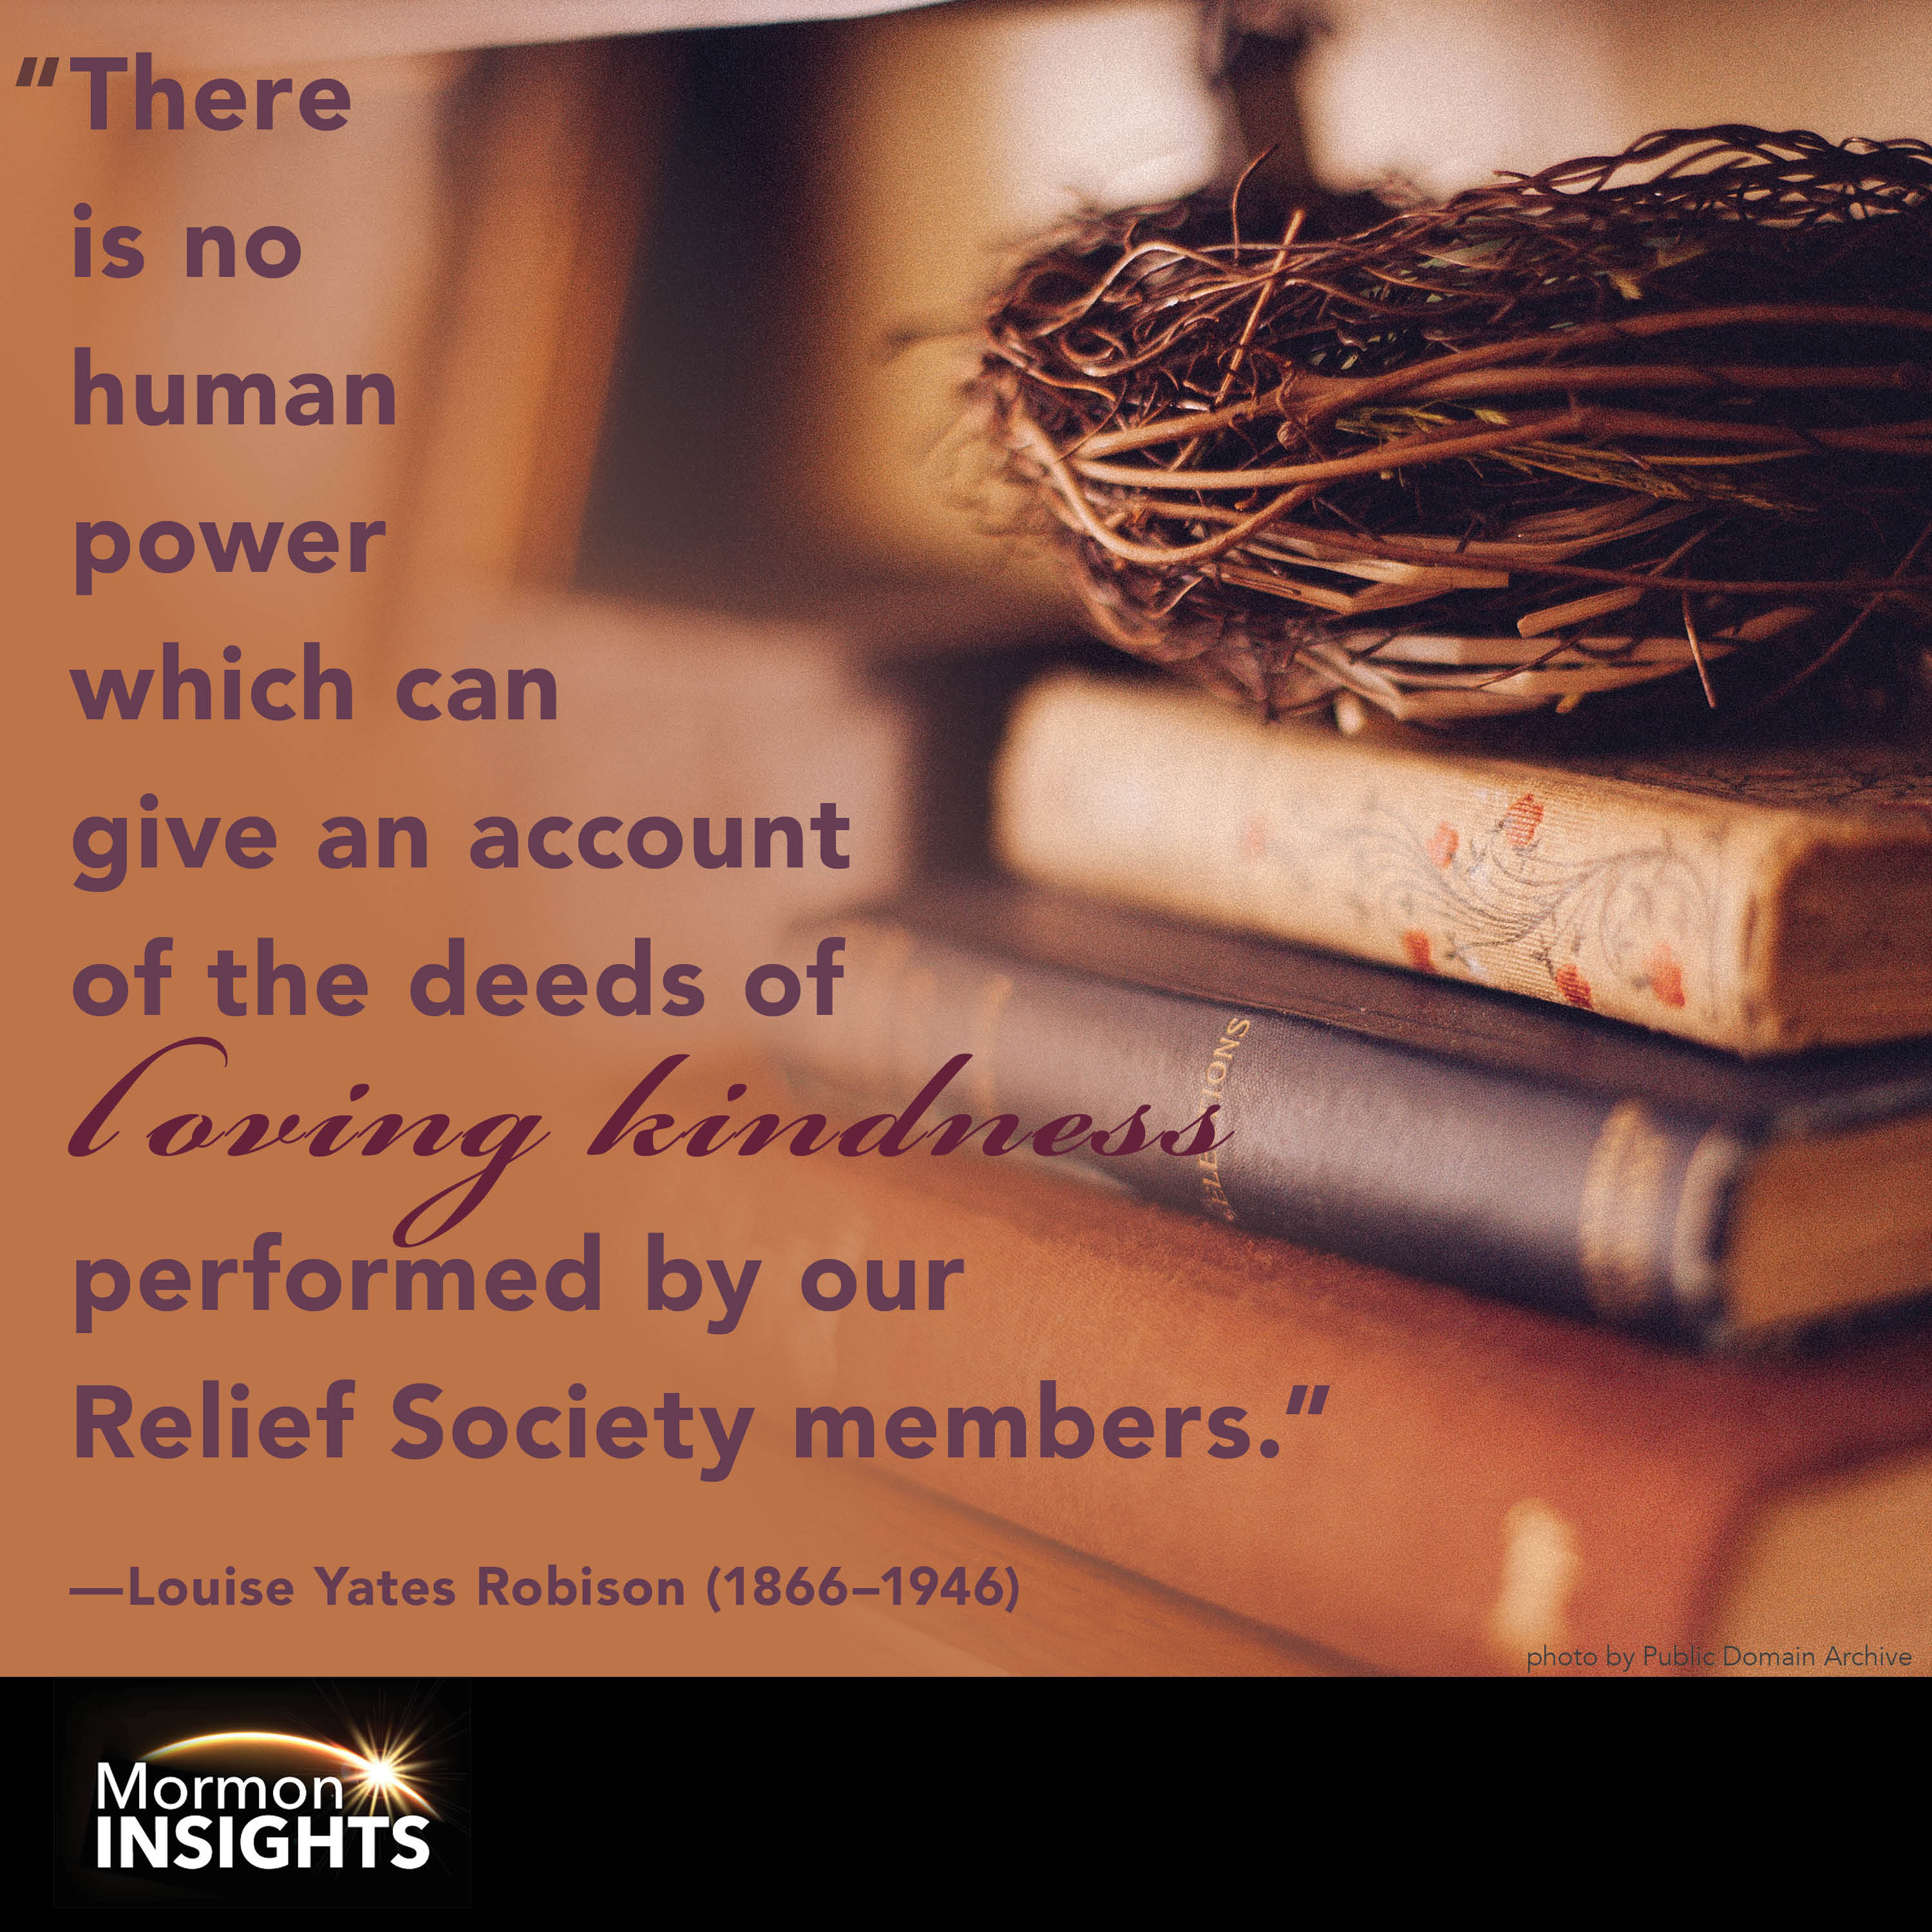 "There is no human power which can give an account of the deeds of loving kindness performed by our Relief Society members." - Louise Yates Robison (1866 through 1946)